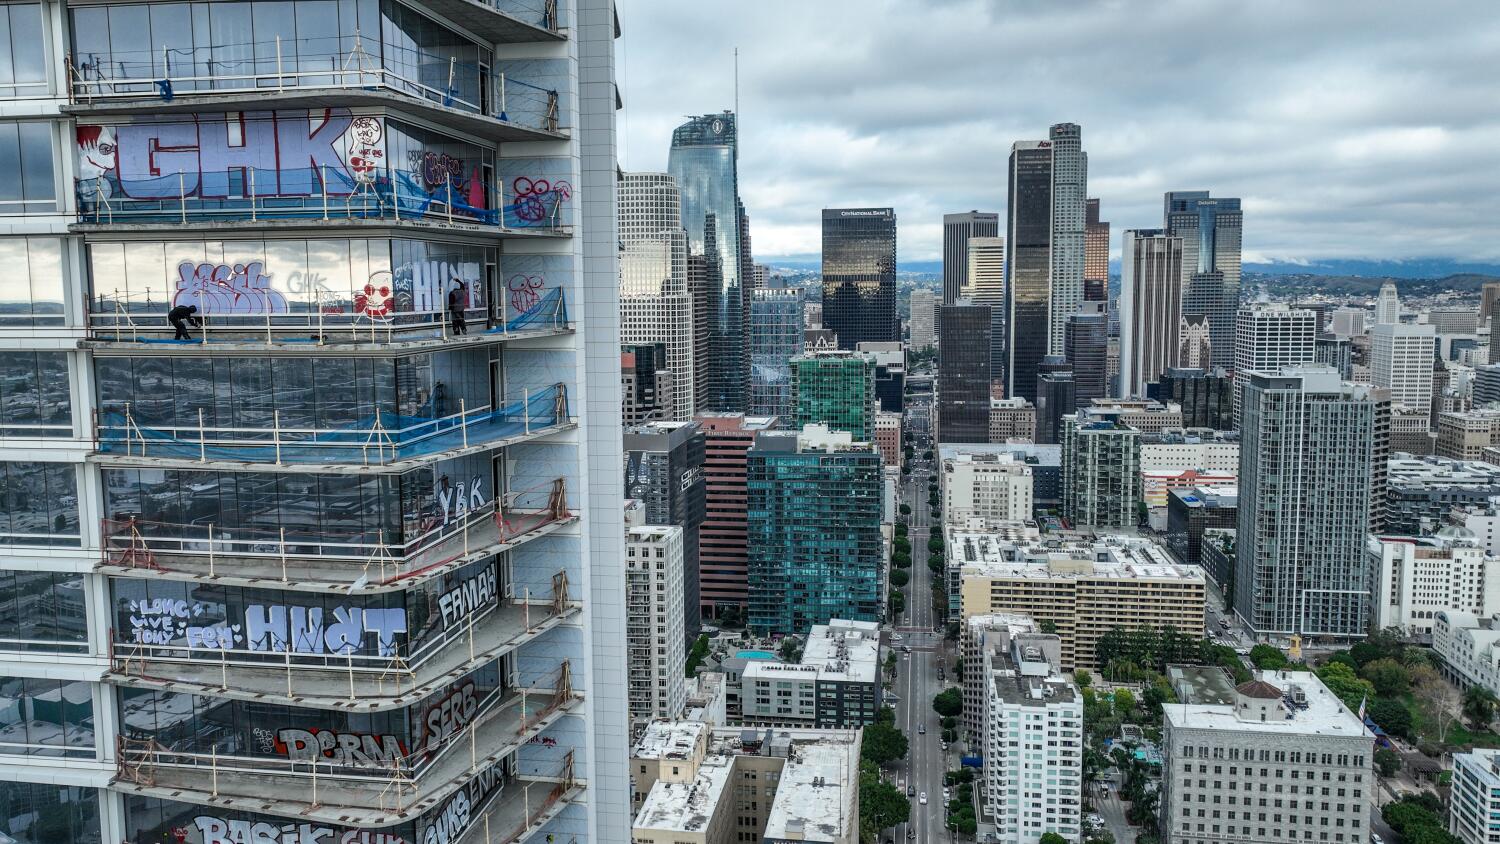 Clean and secure your tagged high-rise or we'll do it for you, L.A. proposes telling owner